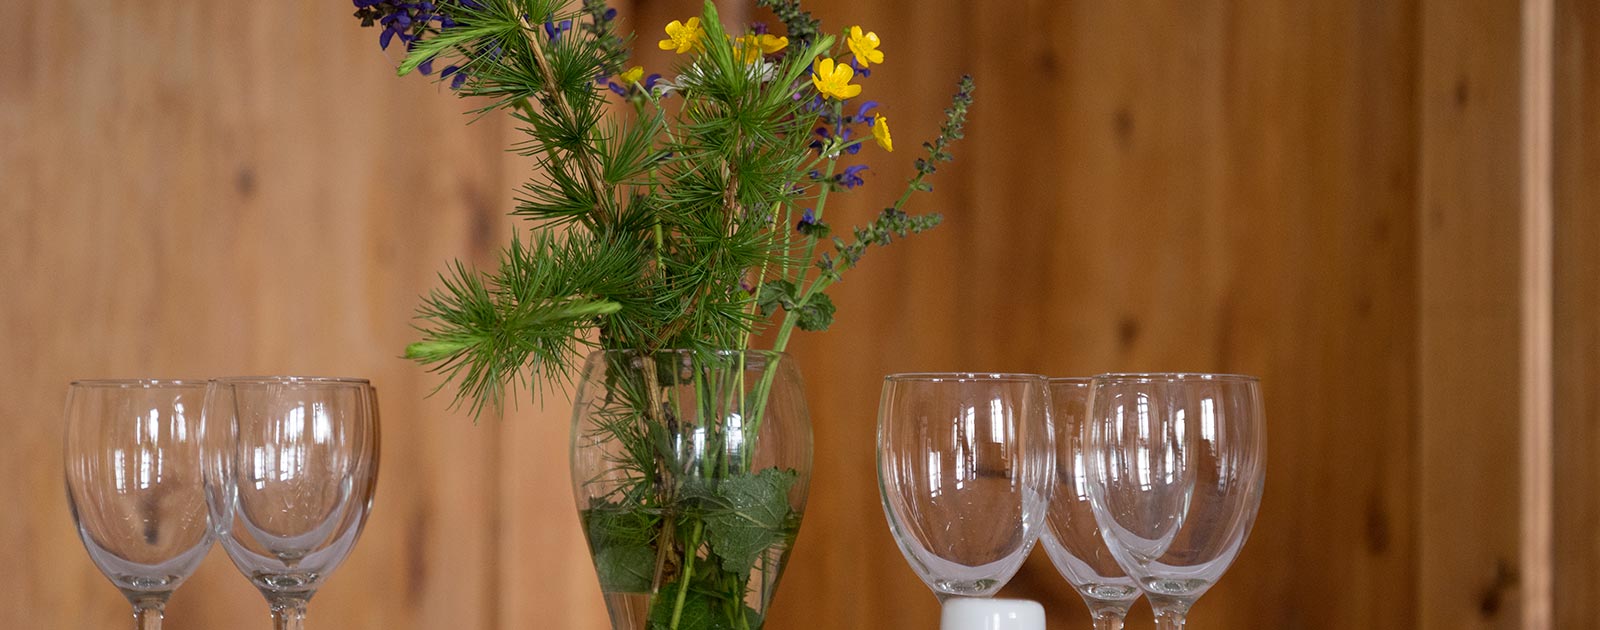 table decoration and wine glasses on a wooden table